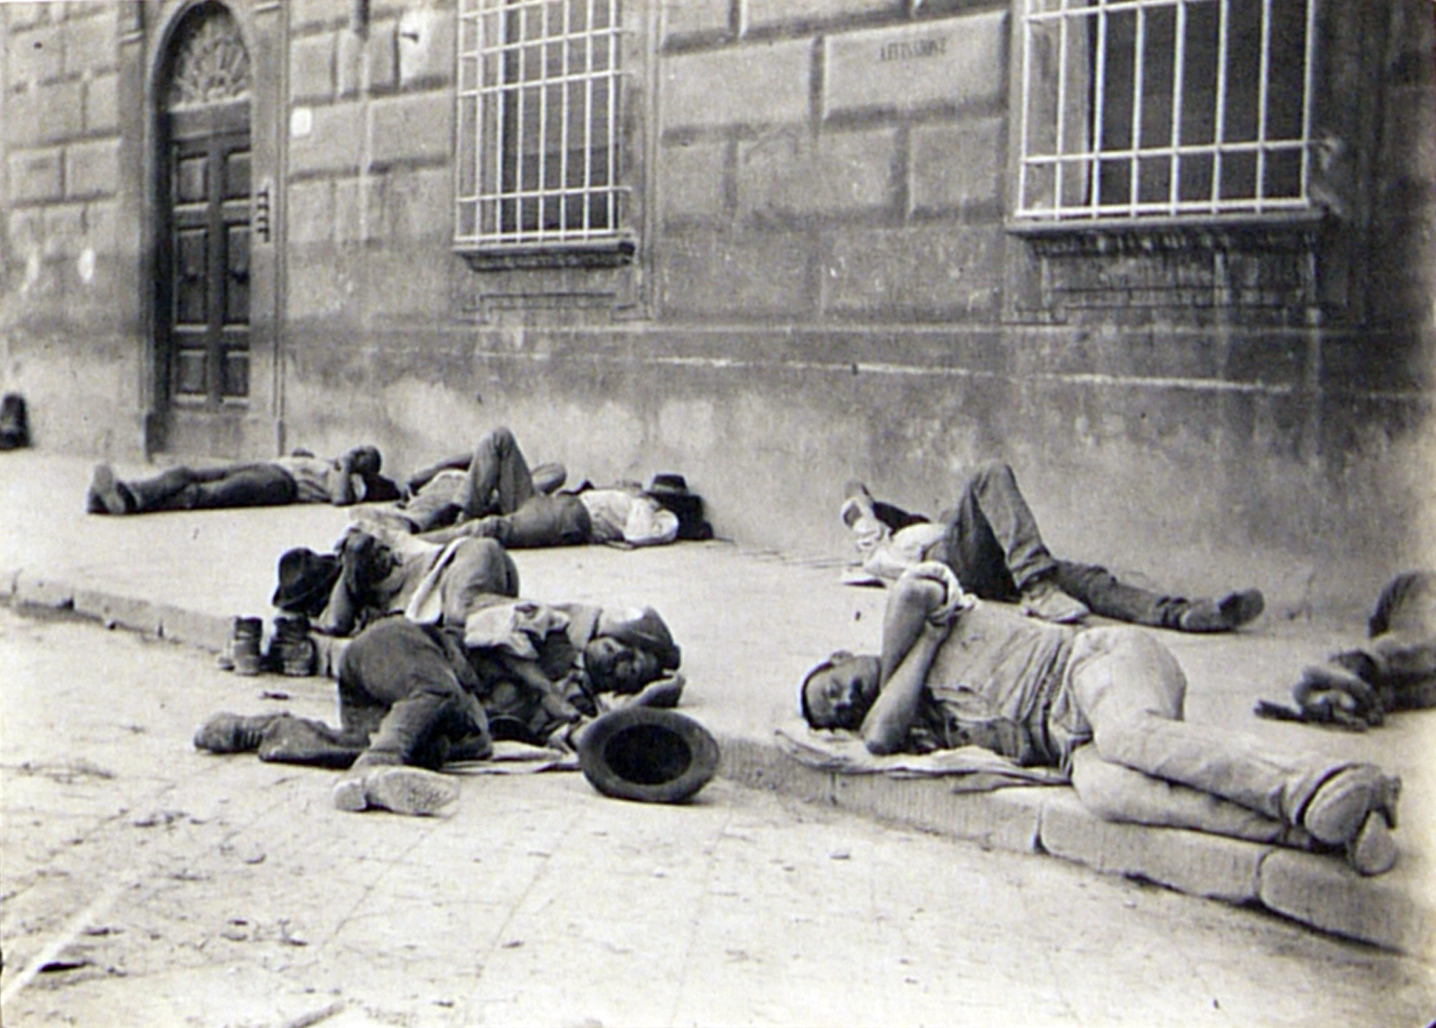 Men asleep in the Piazza S. Marco, Florence. 1892 (Album 2/35/6) 